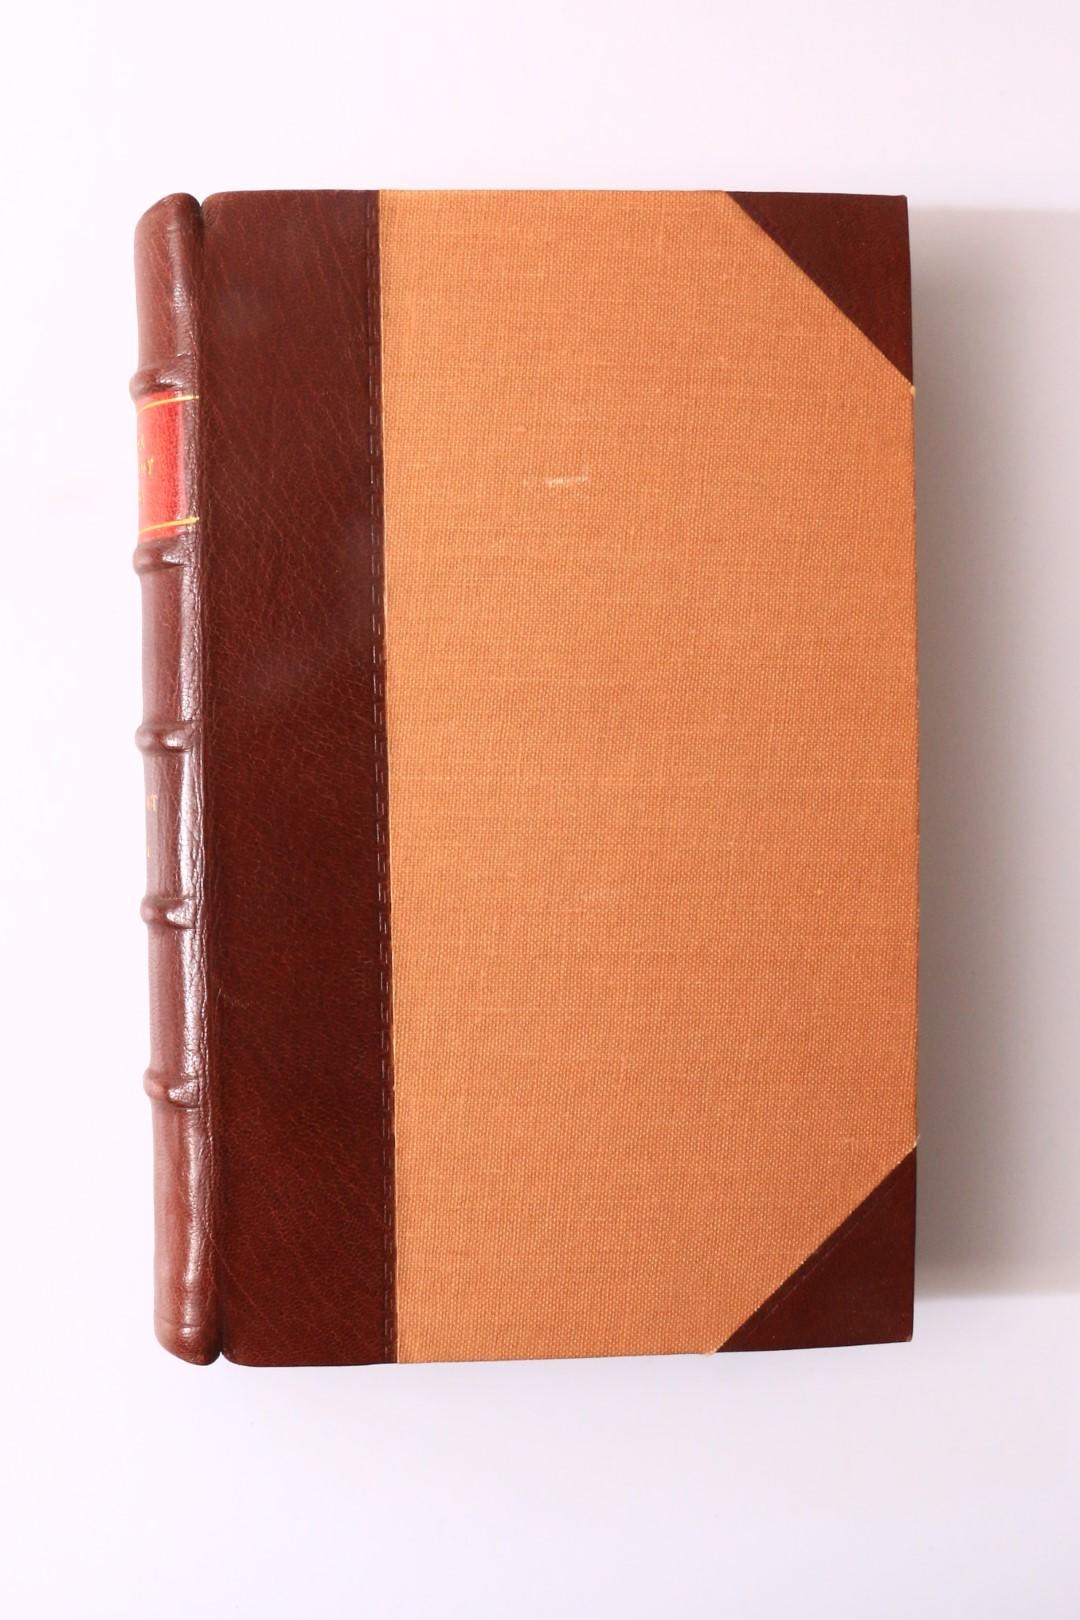 Frederick Marryat - Pacha of Many Tales - Saunders & Otley, 1835, First Edition.